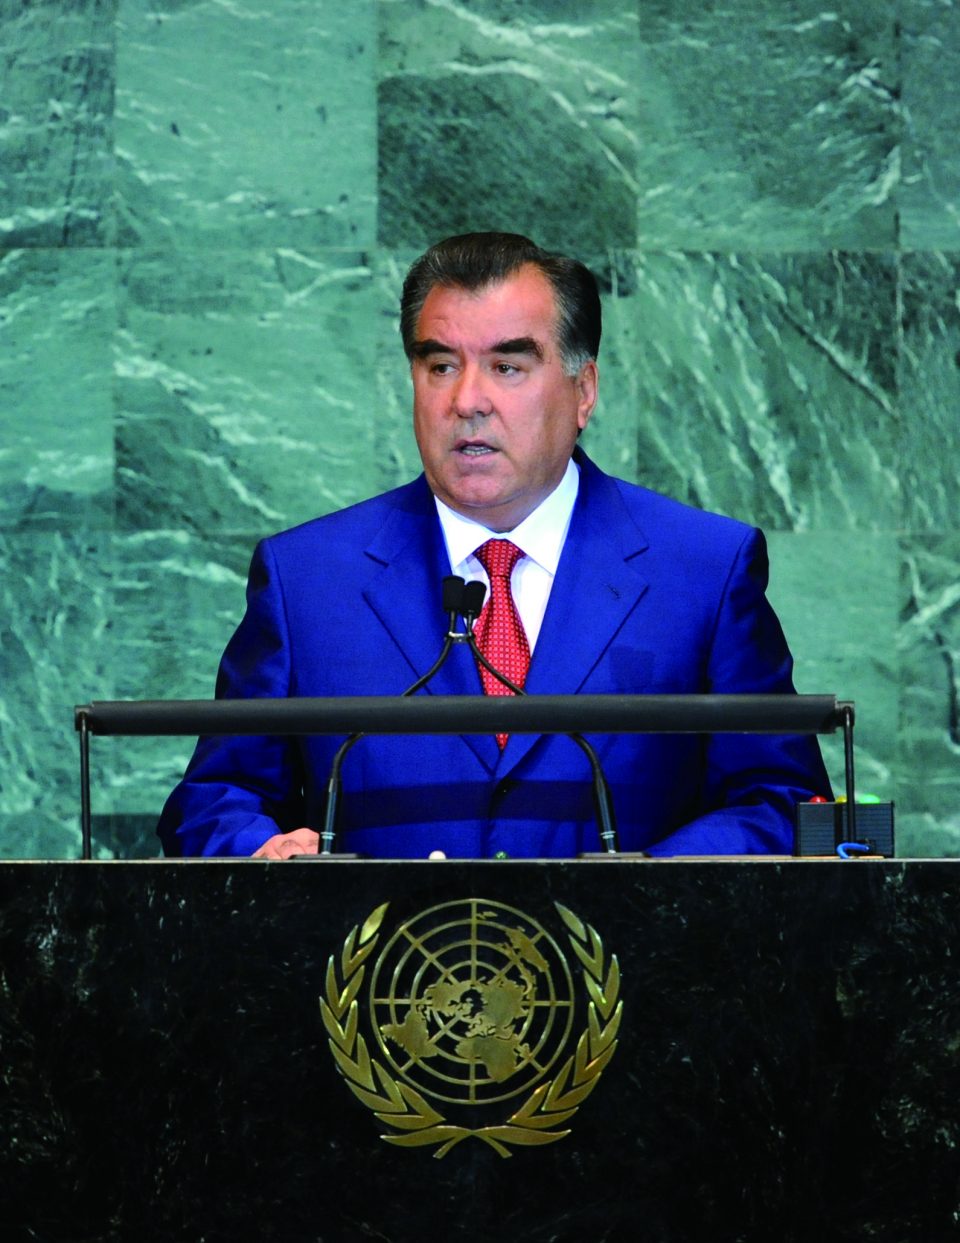 (100923) -- NEW YORK, Sept. 23, 2010 (Xinhua) -- Tajikistan's President Emomali Rahmon addresses the general debate of the 65th session of the UN General Assembly in New York, the United States, Sept. 23, 2010. (Xinhua/Shen Hong) (zw)